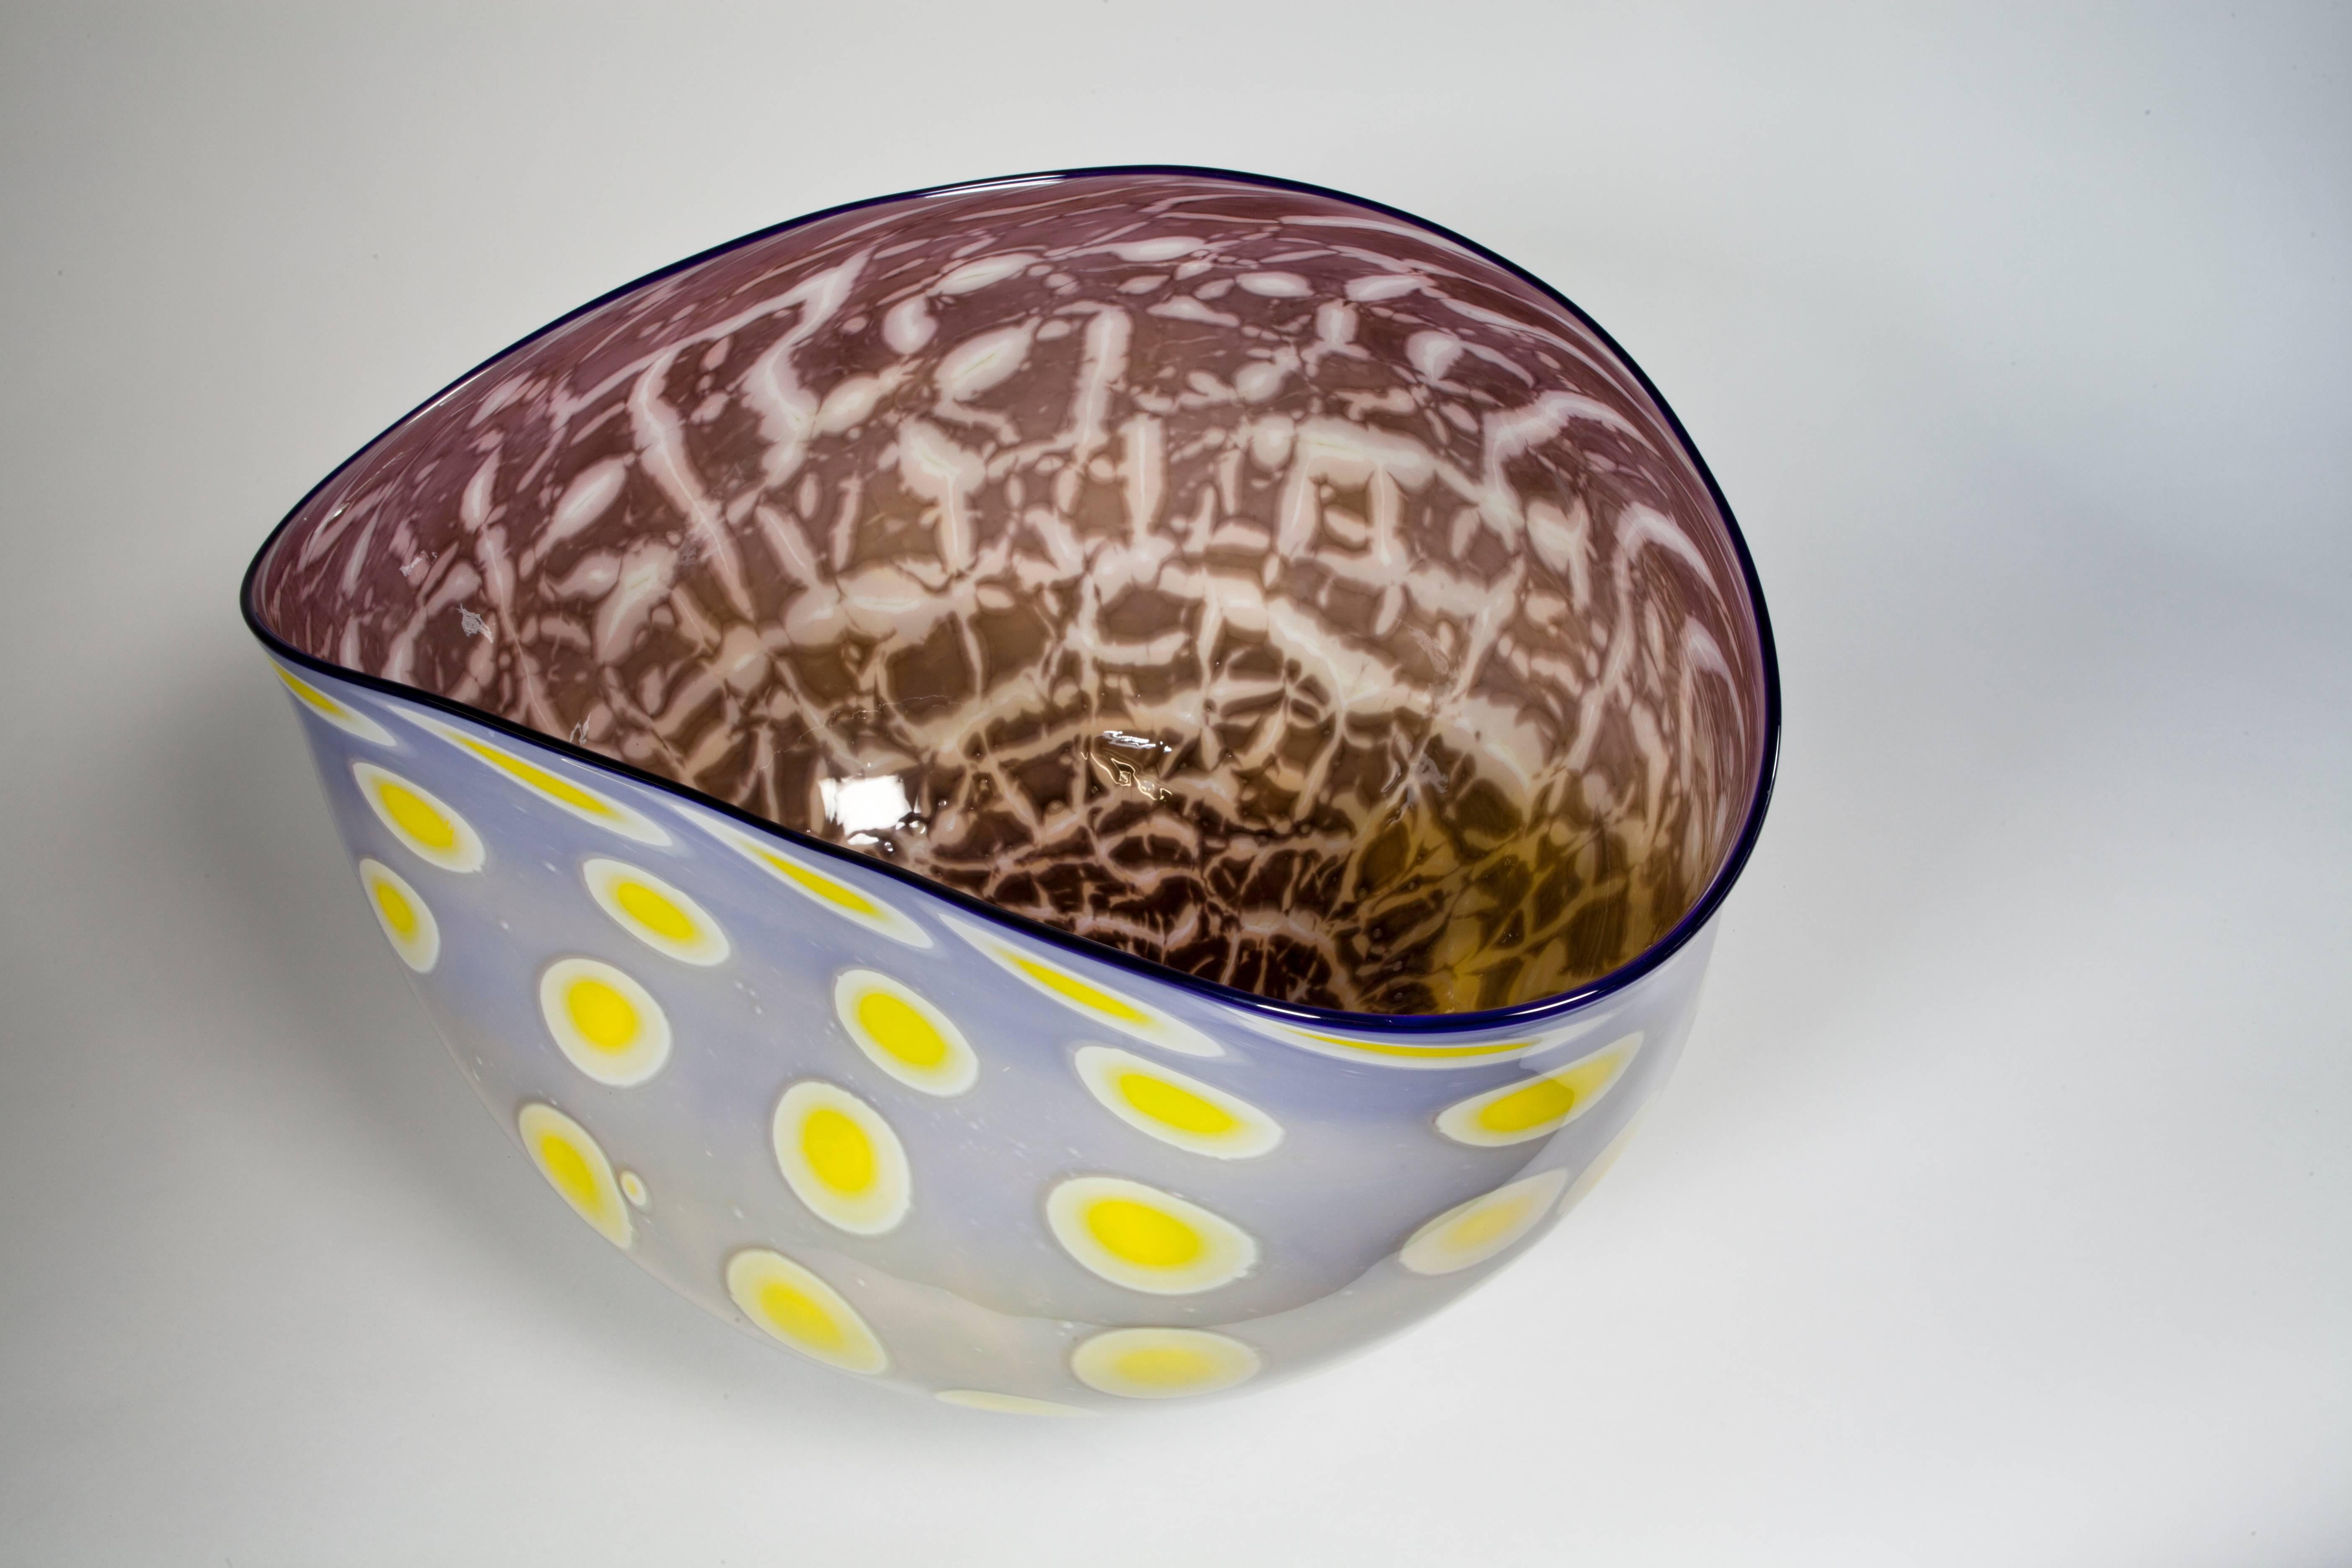 Unique art glass bowl with double graal technique by Peter Bremers, 2001. Signed 'Peter Bremers. Graal 063'

This object can be shipped worldwide, in a custom-made wooden chest- 

This beautiful glass bowl is part of the Metamorphosis series.